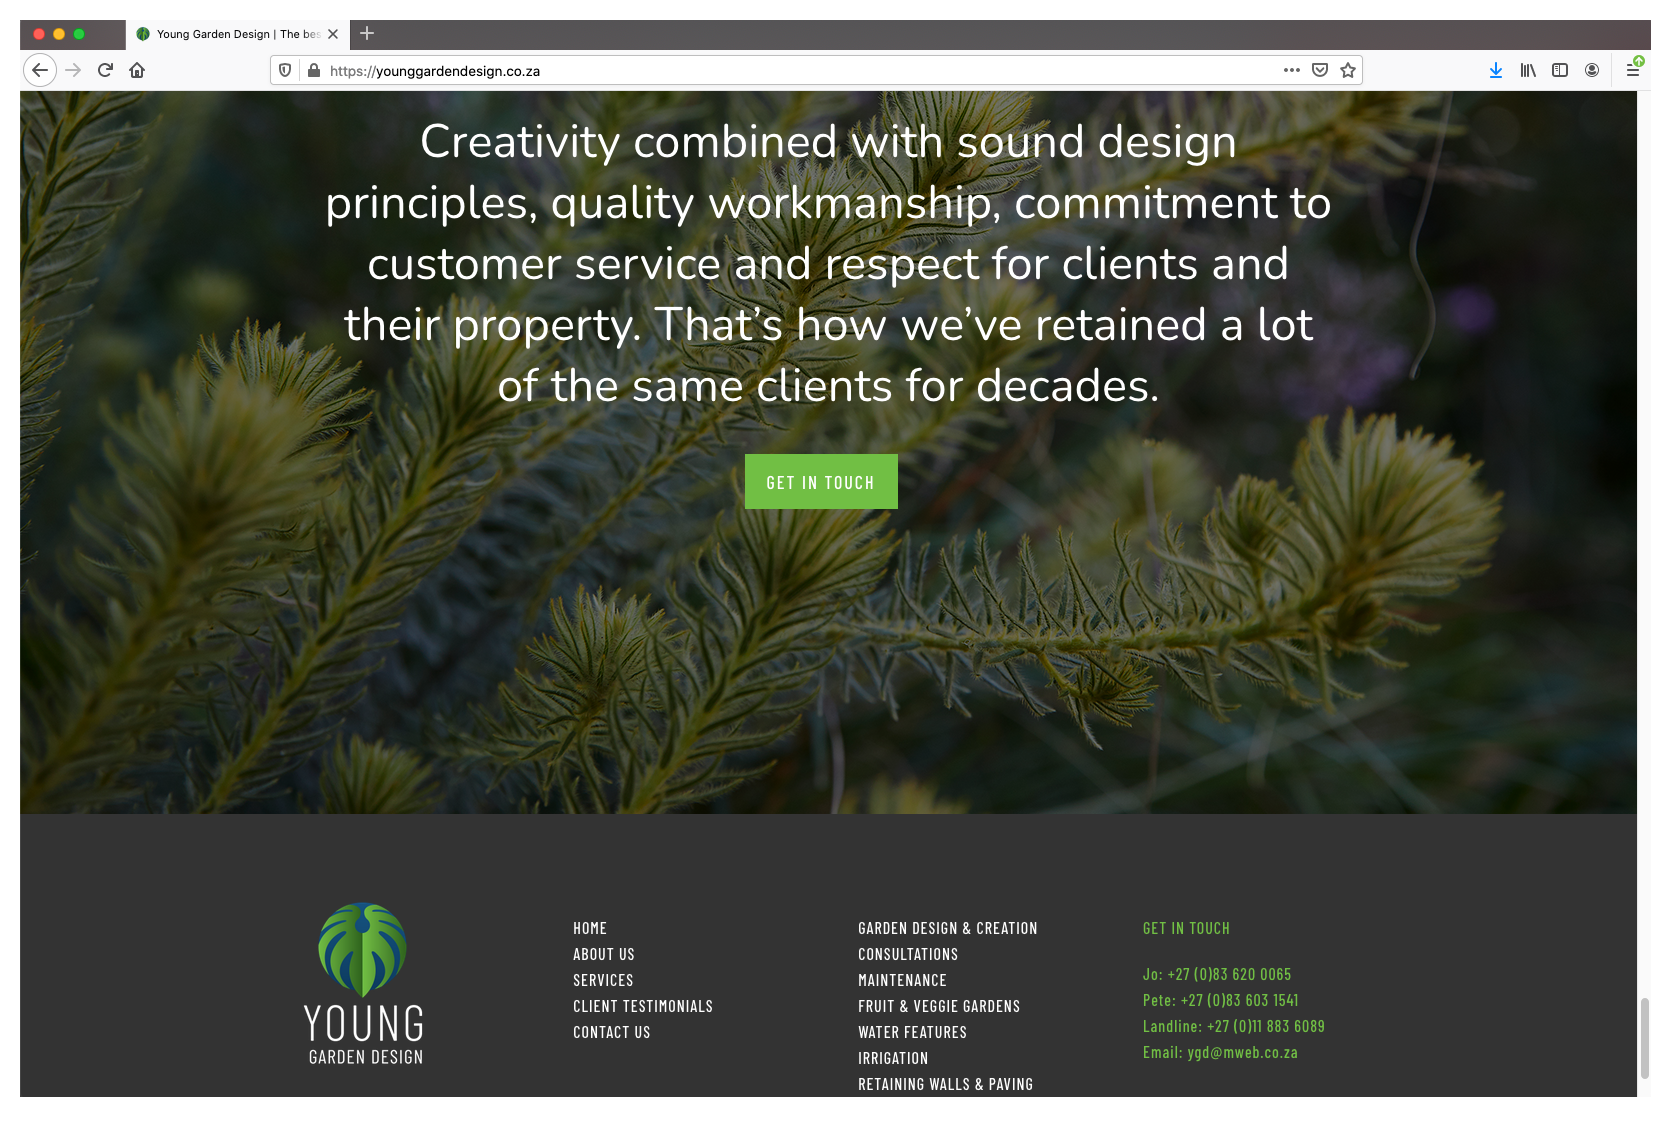 Young Garden Design, typical website page